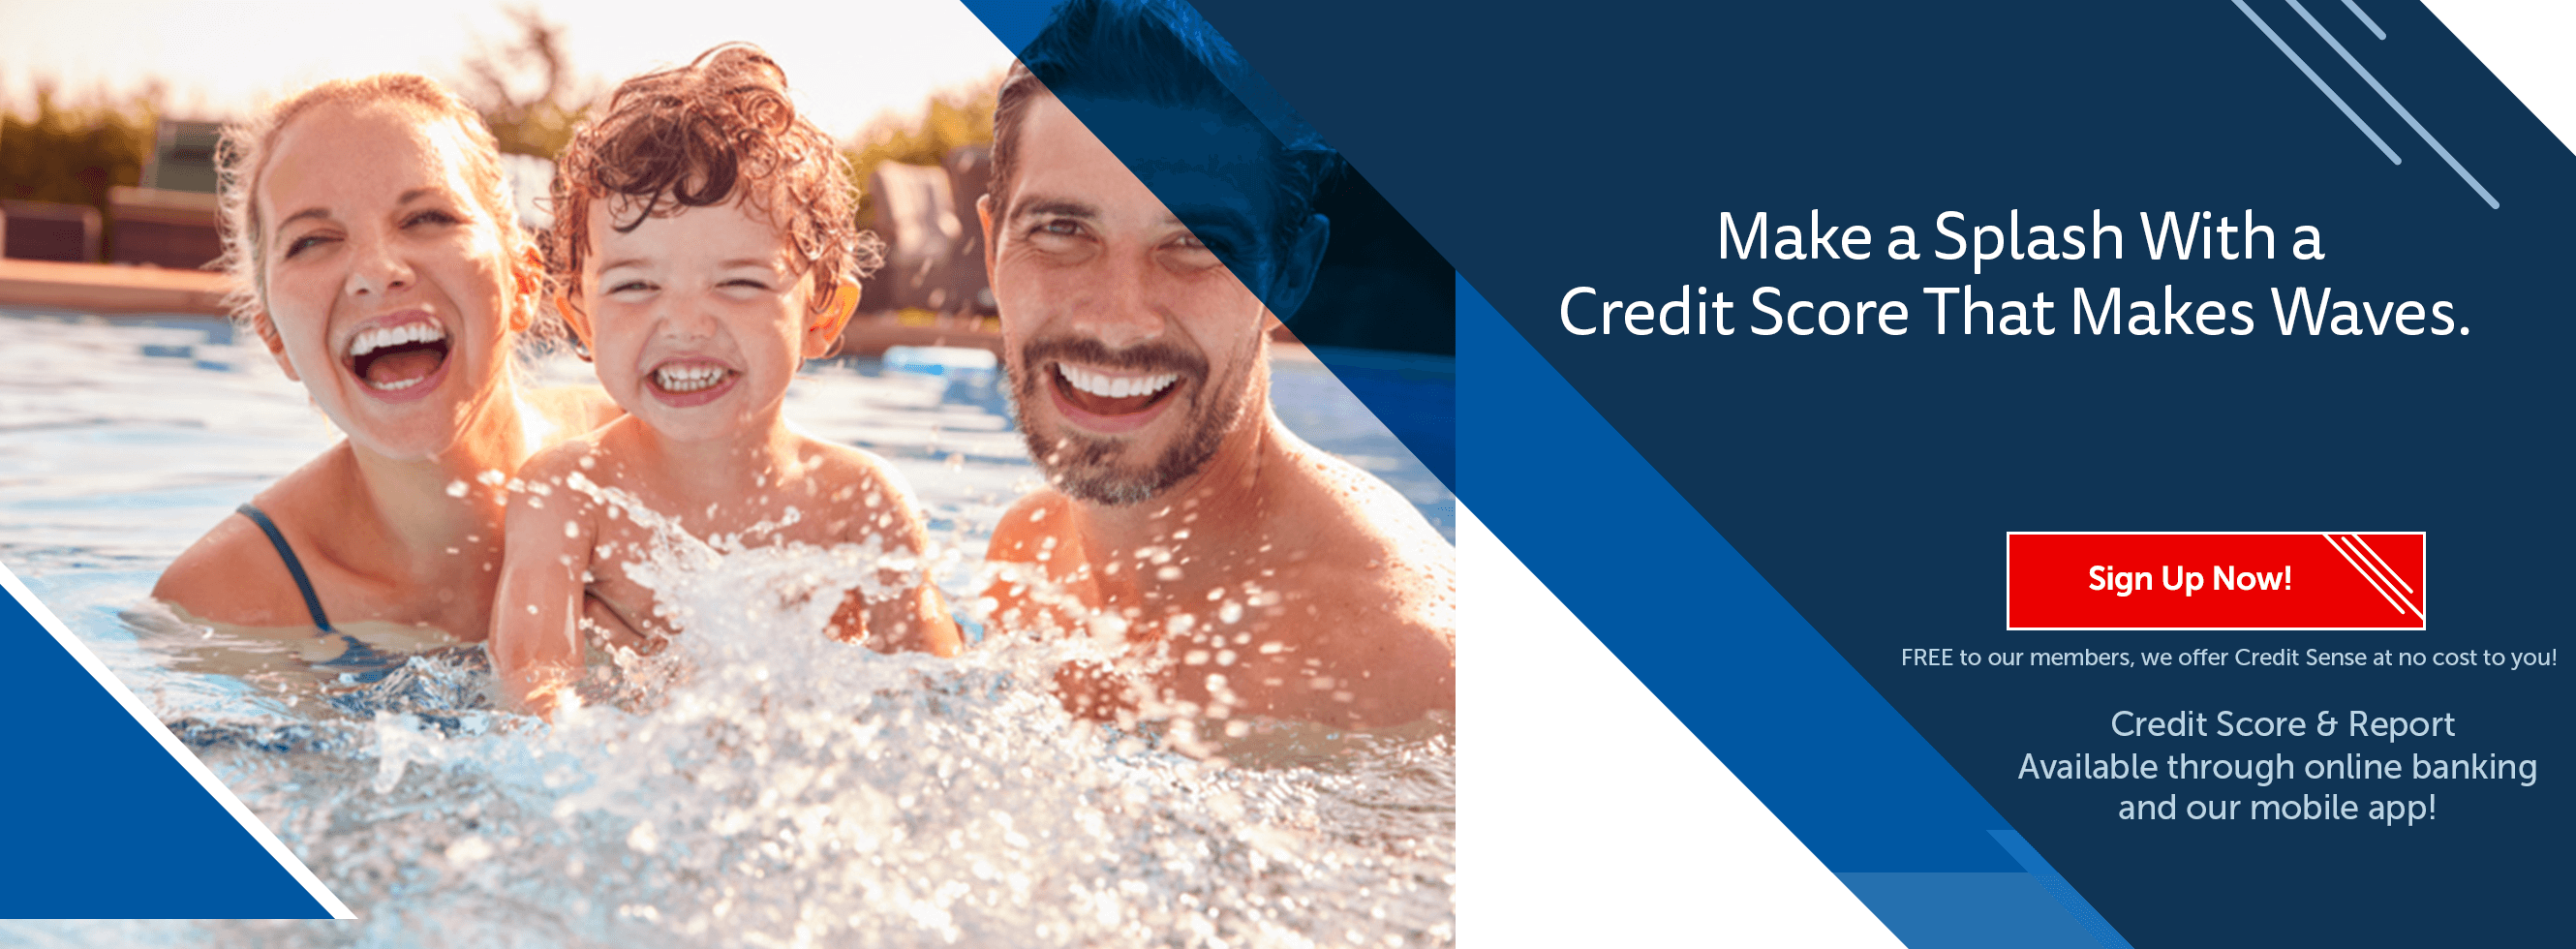 Make a with a Credit Score that makes waves.